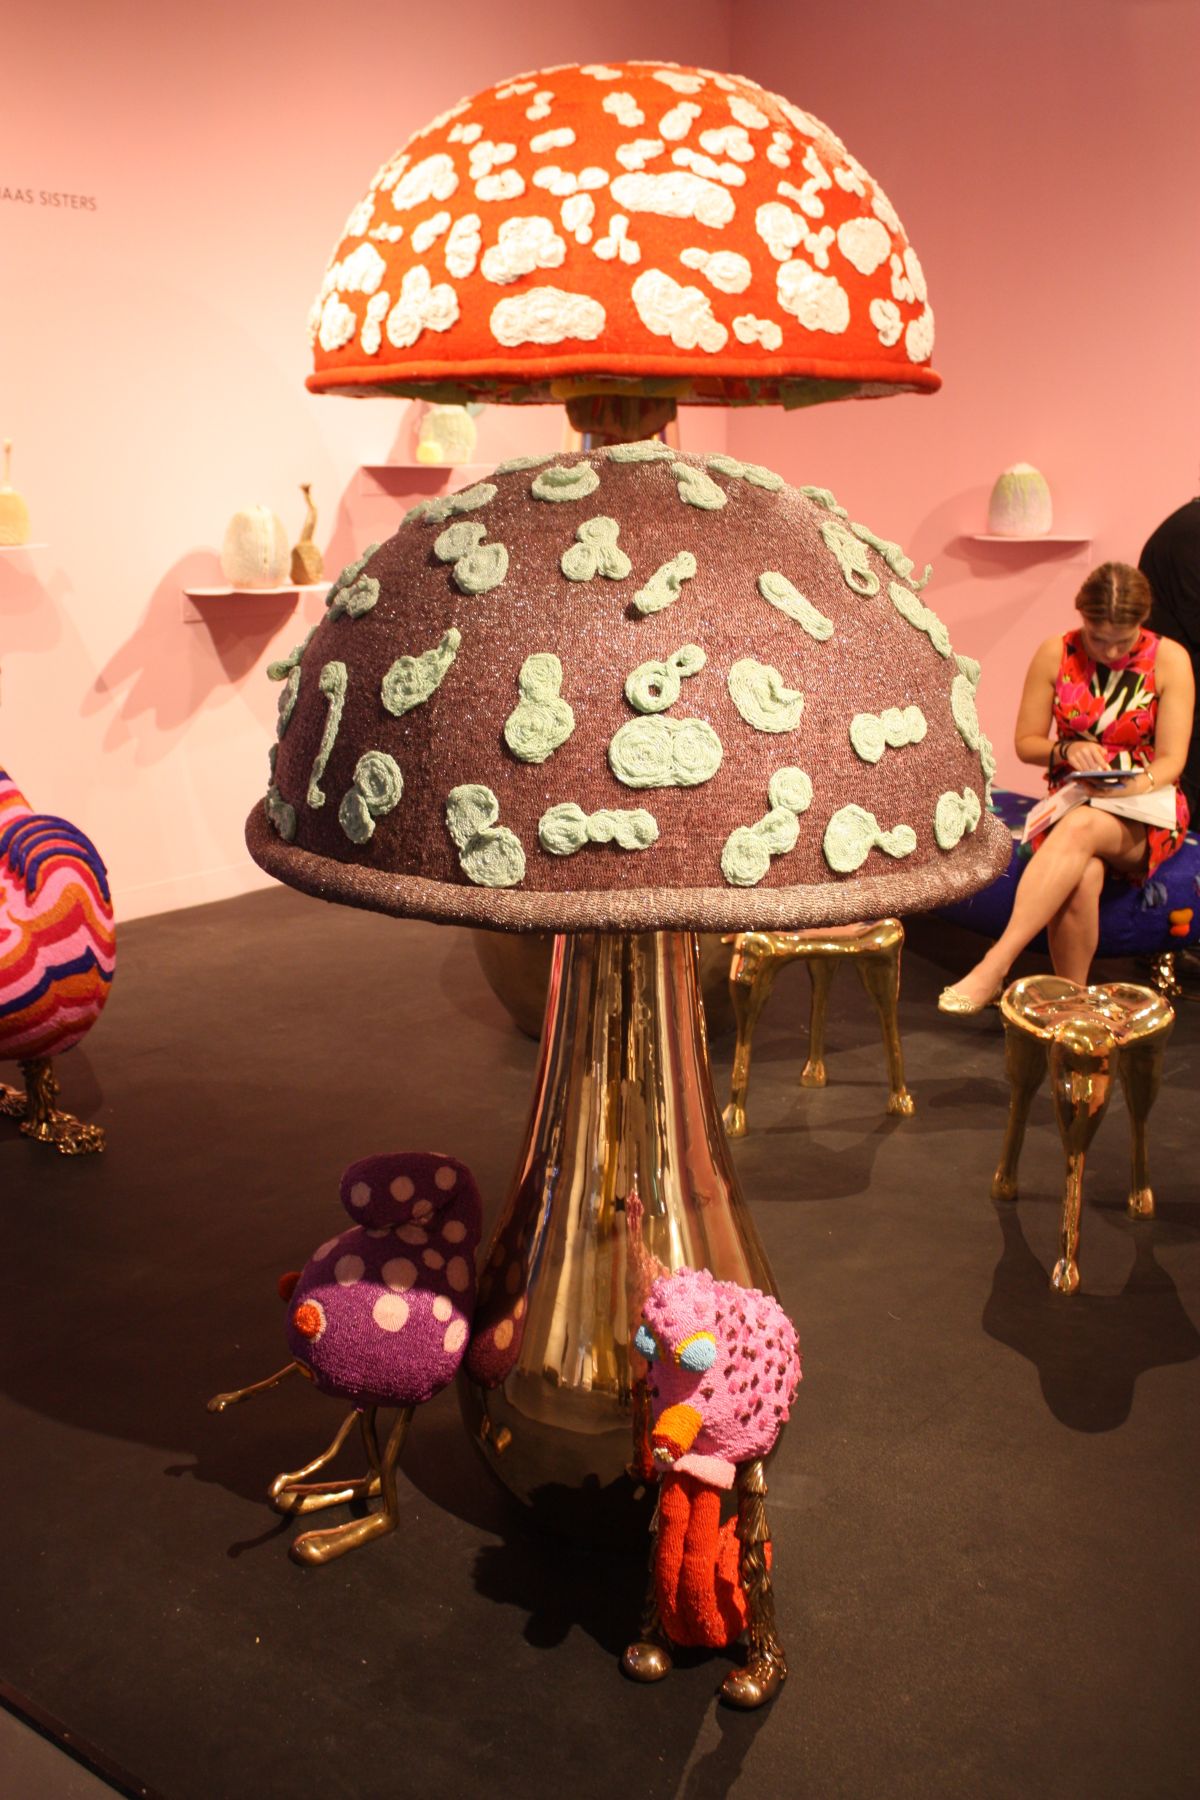 Giant beaded mushrooms are accompanied by small, imaginary creatures.